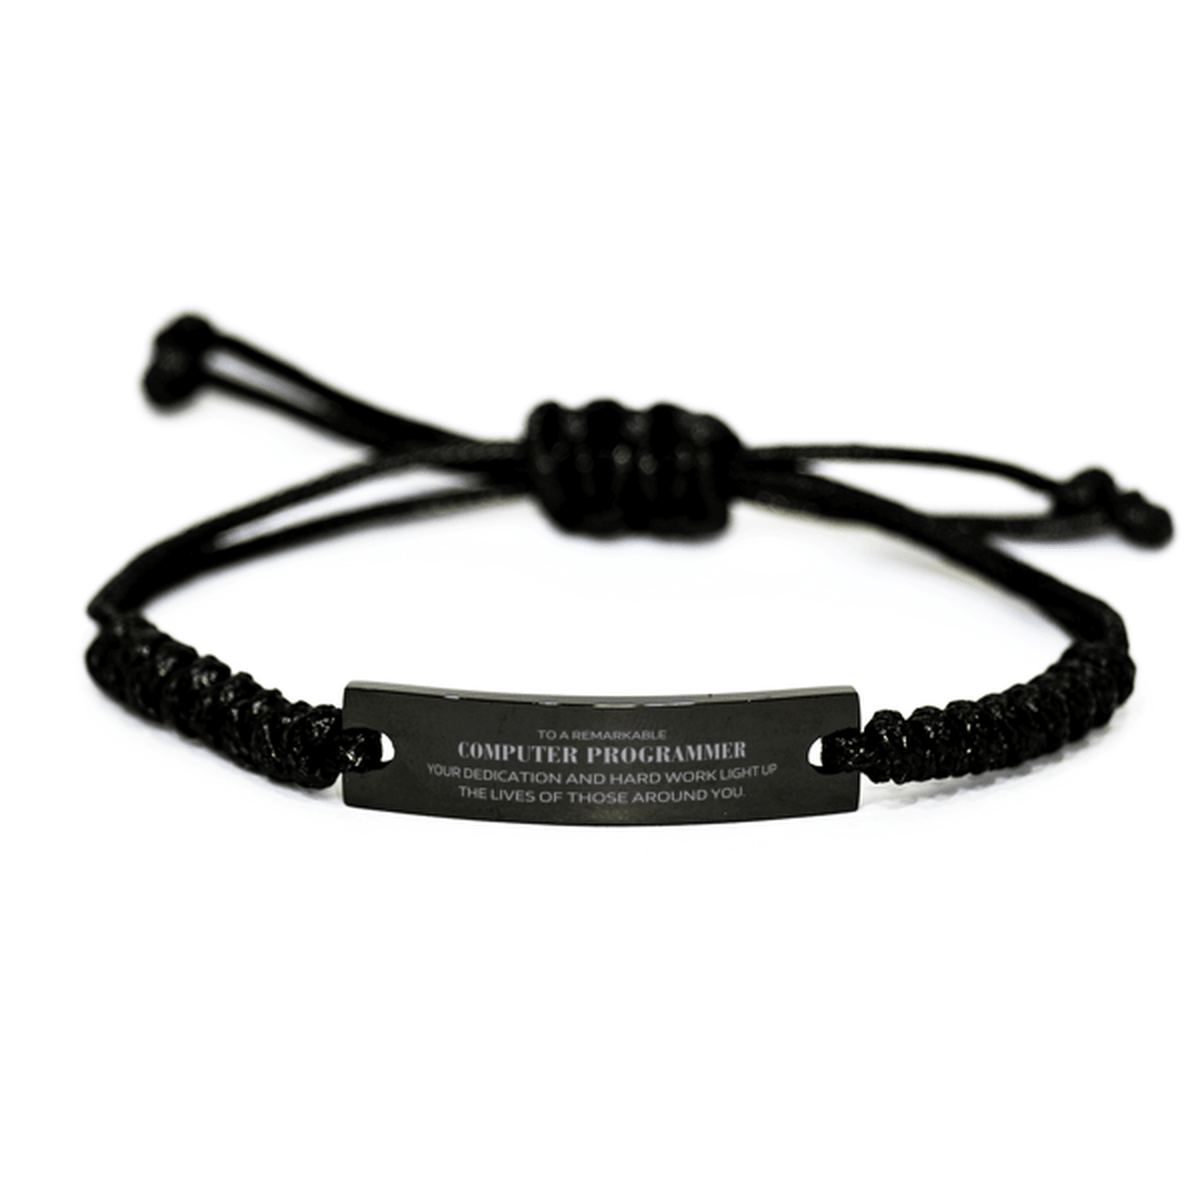 Remarkable Computer Programmer Gifts, Your dedication and hard work, Inspirational Birthday Christmas Unique Black Rope Bracelet For Computer Programmer, Coworkers, Men, Women, Friends - Mallard Moon Gift Shop